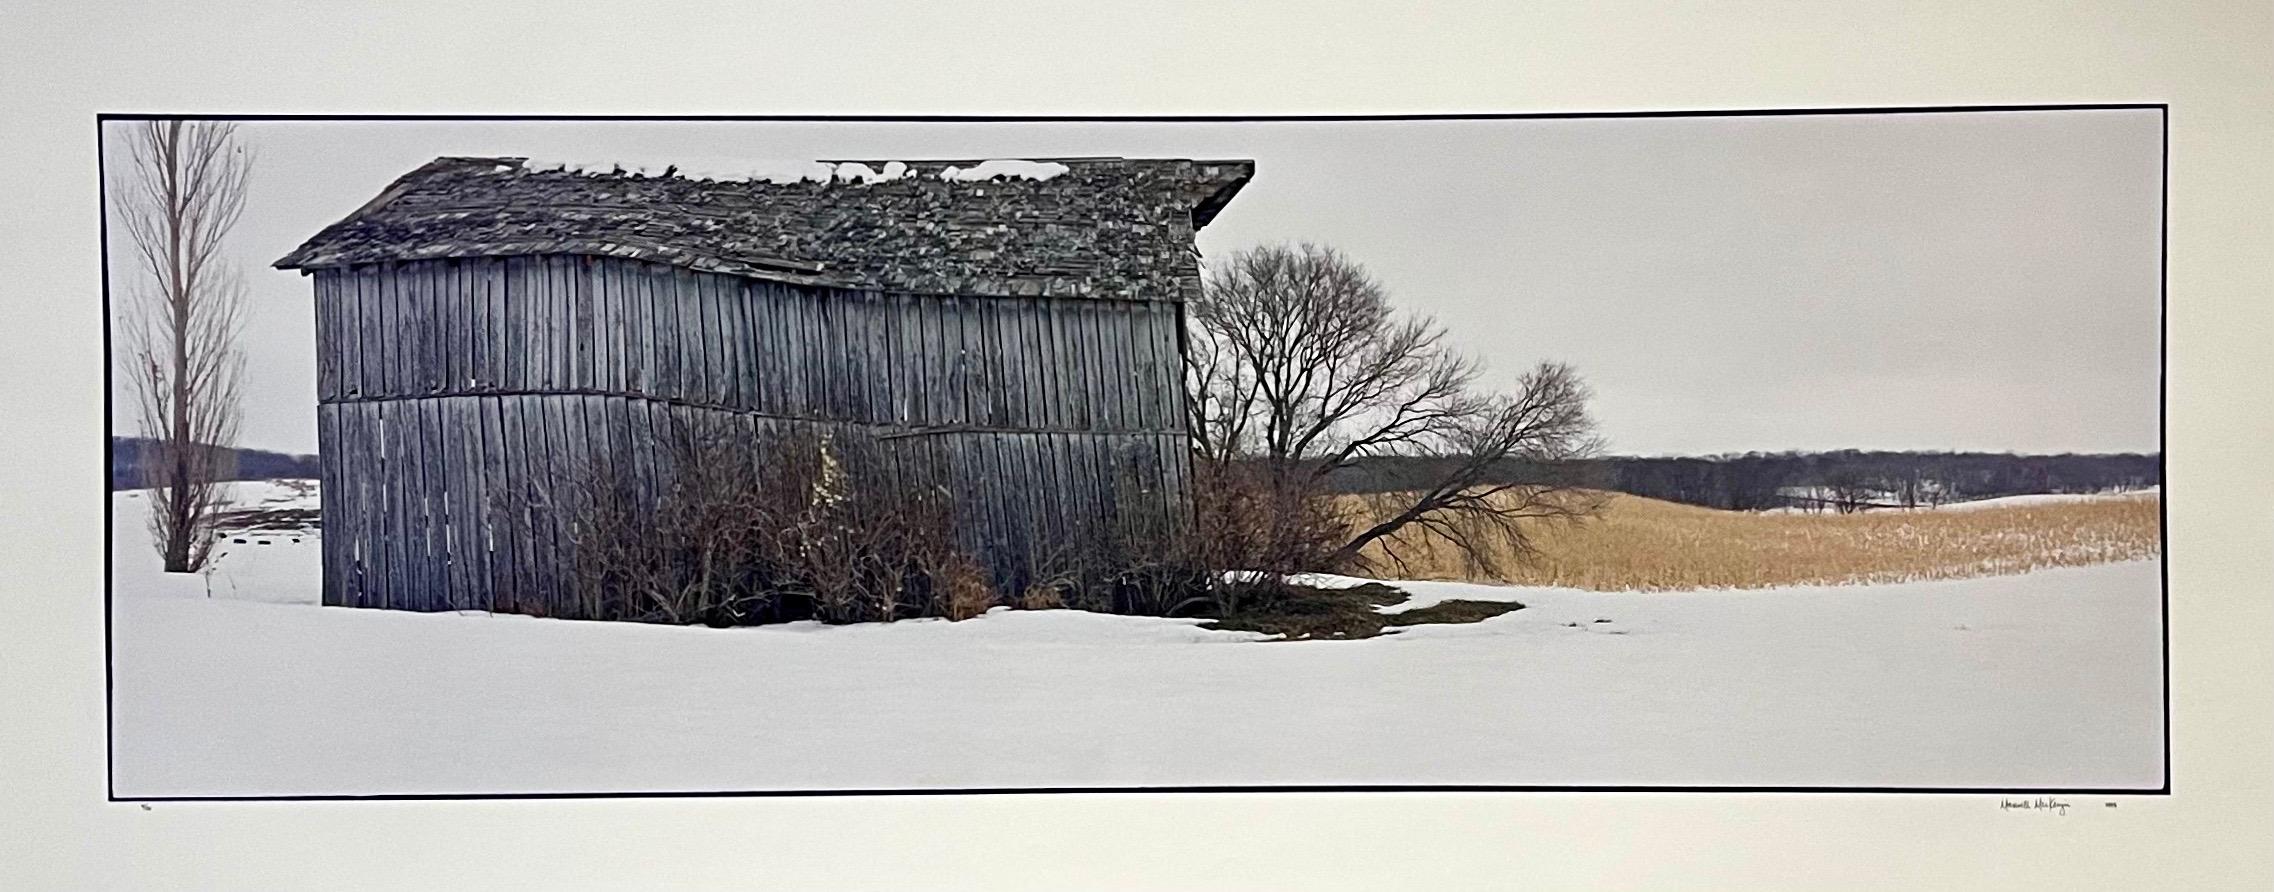 Barn in Snow, Winter Landscape, Large Panoramic Color Photograph Signed Photo